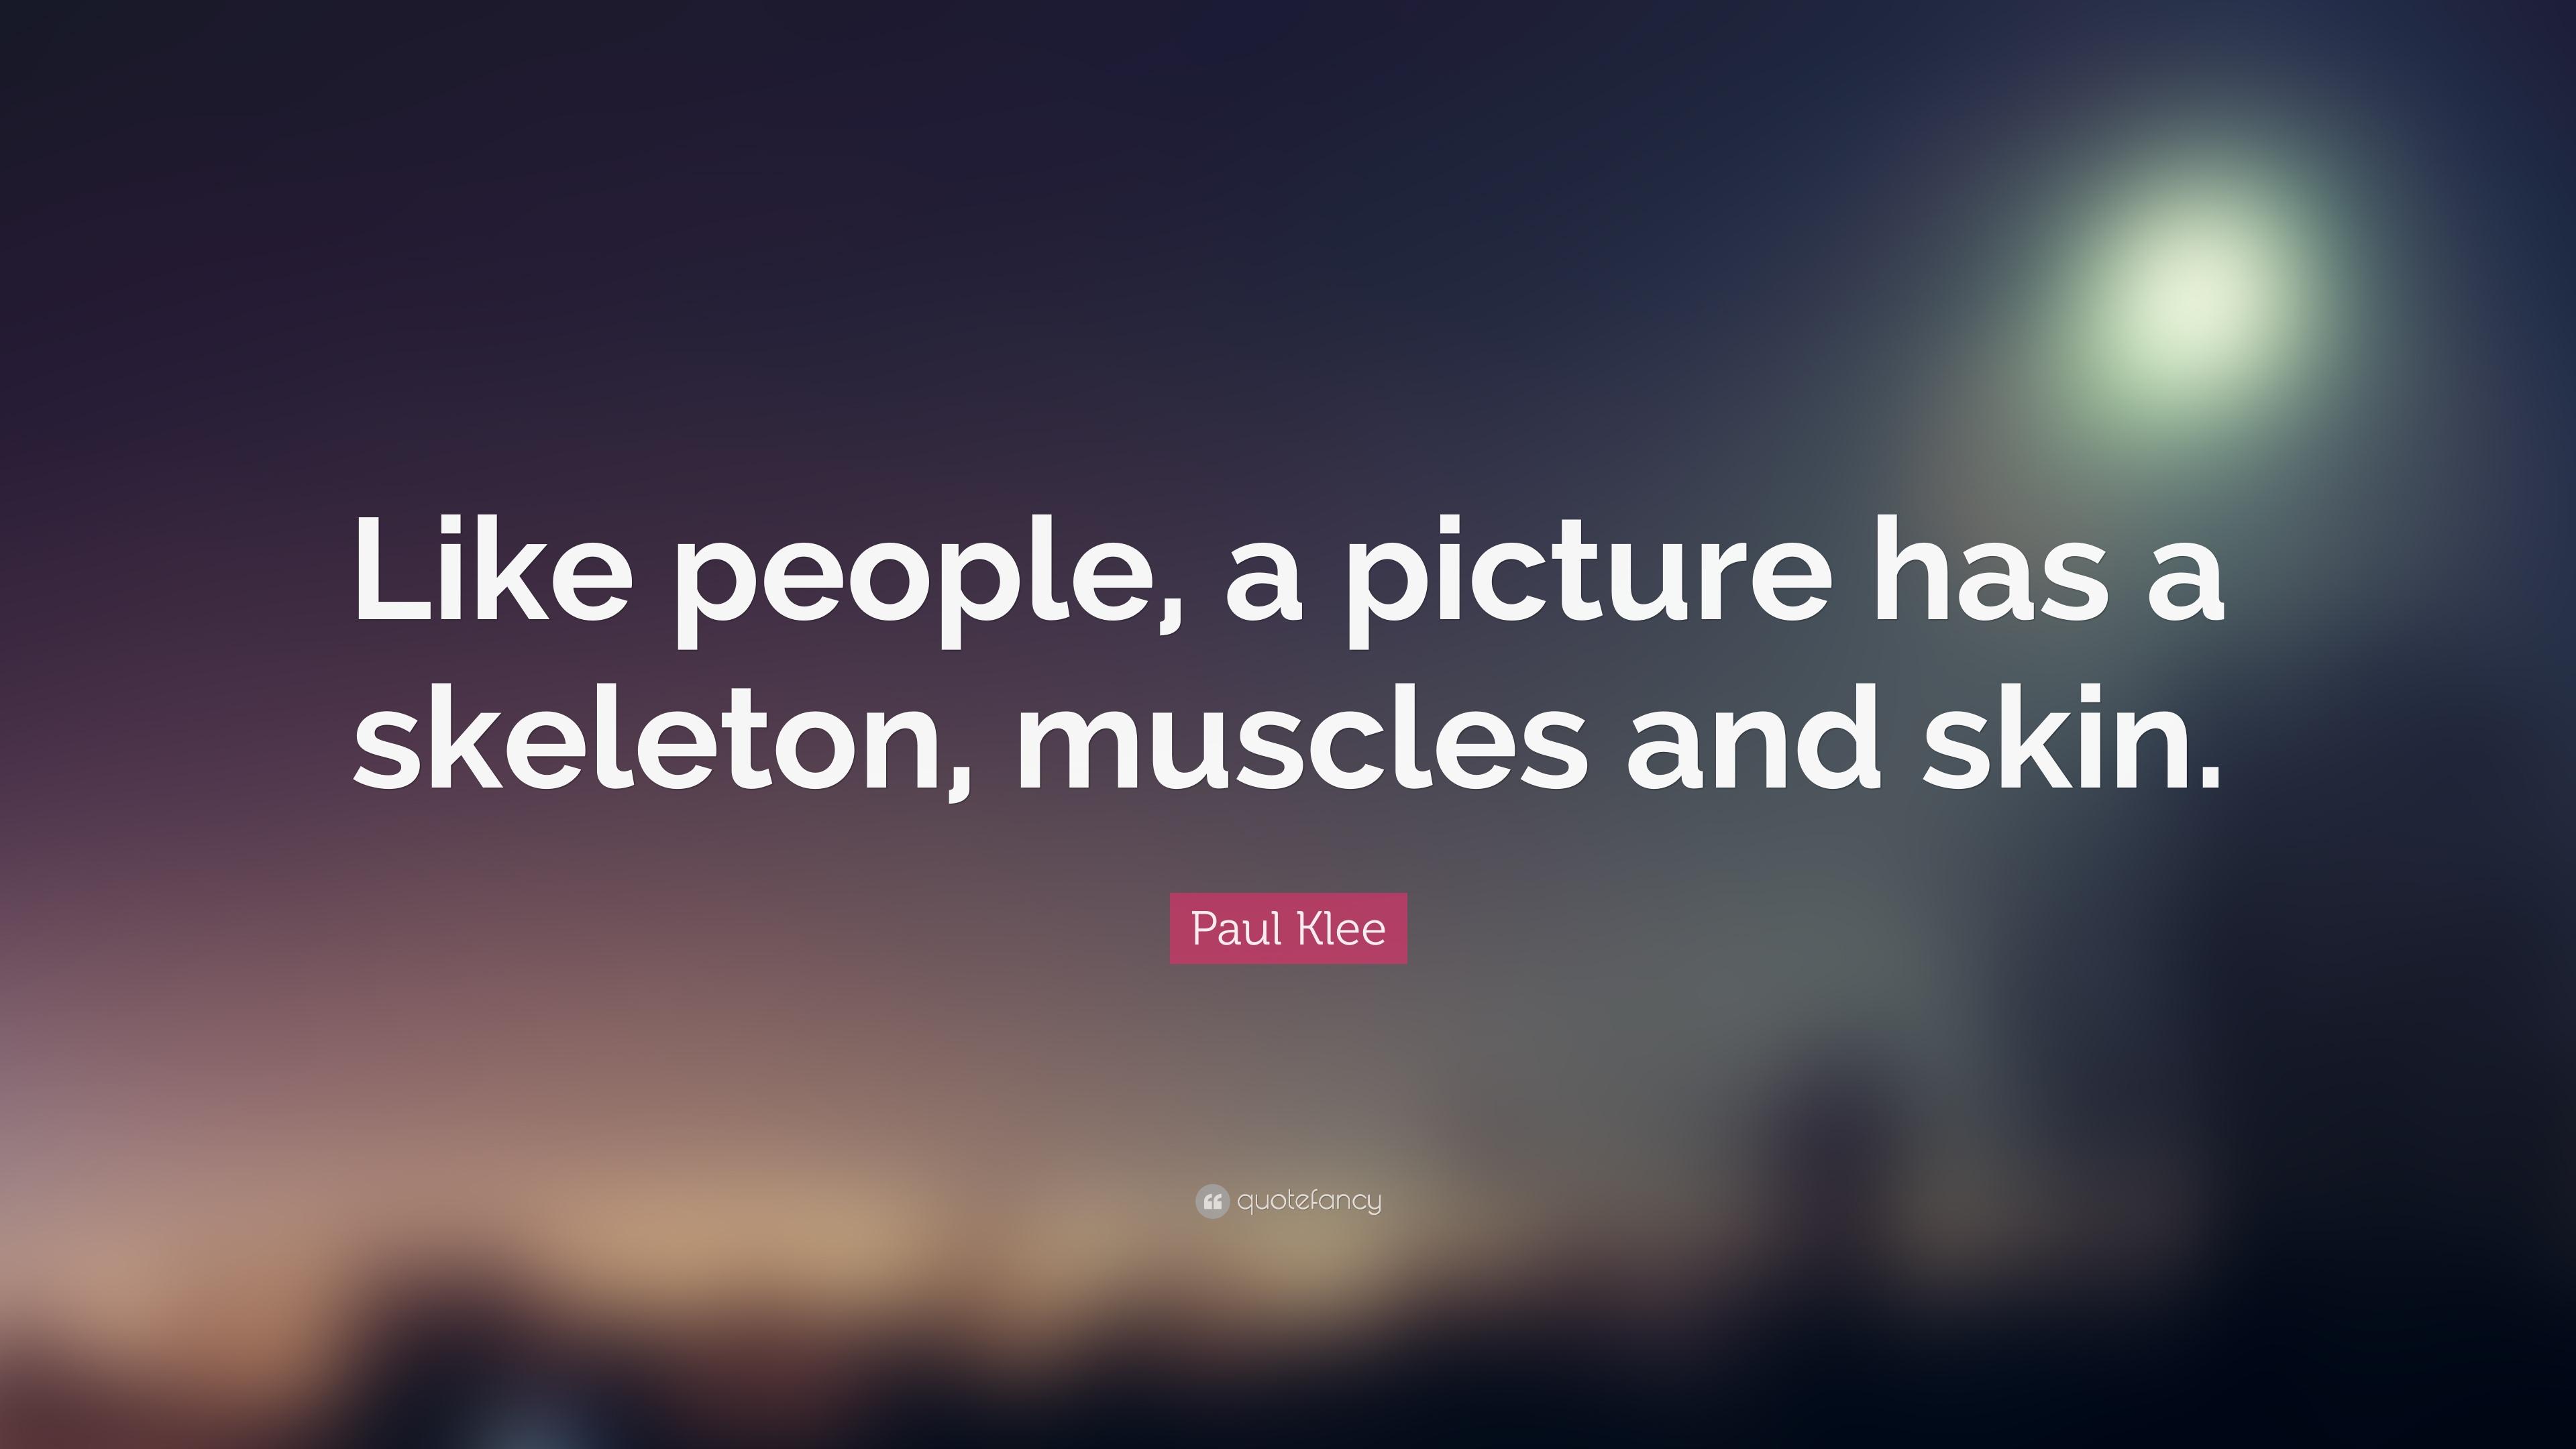 Paul Klee Quote: “Like people, a picture has a skeleton